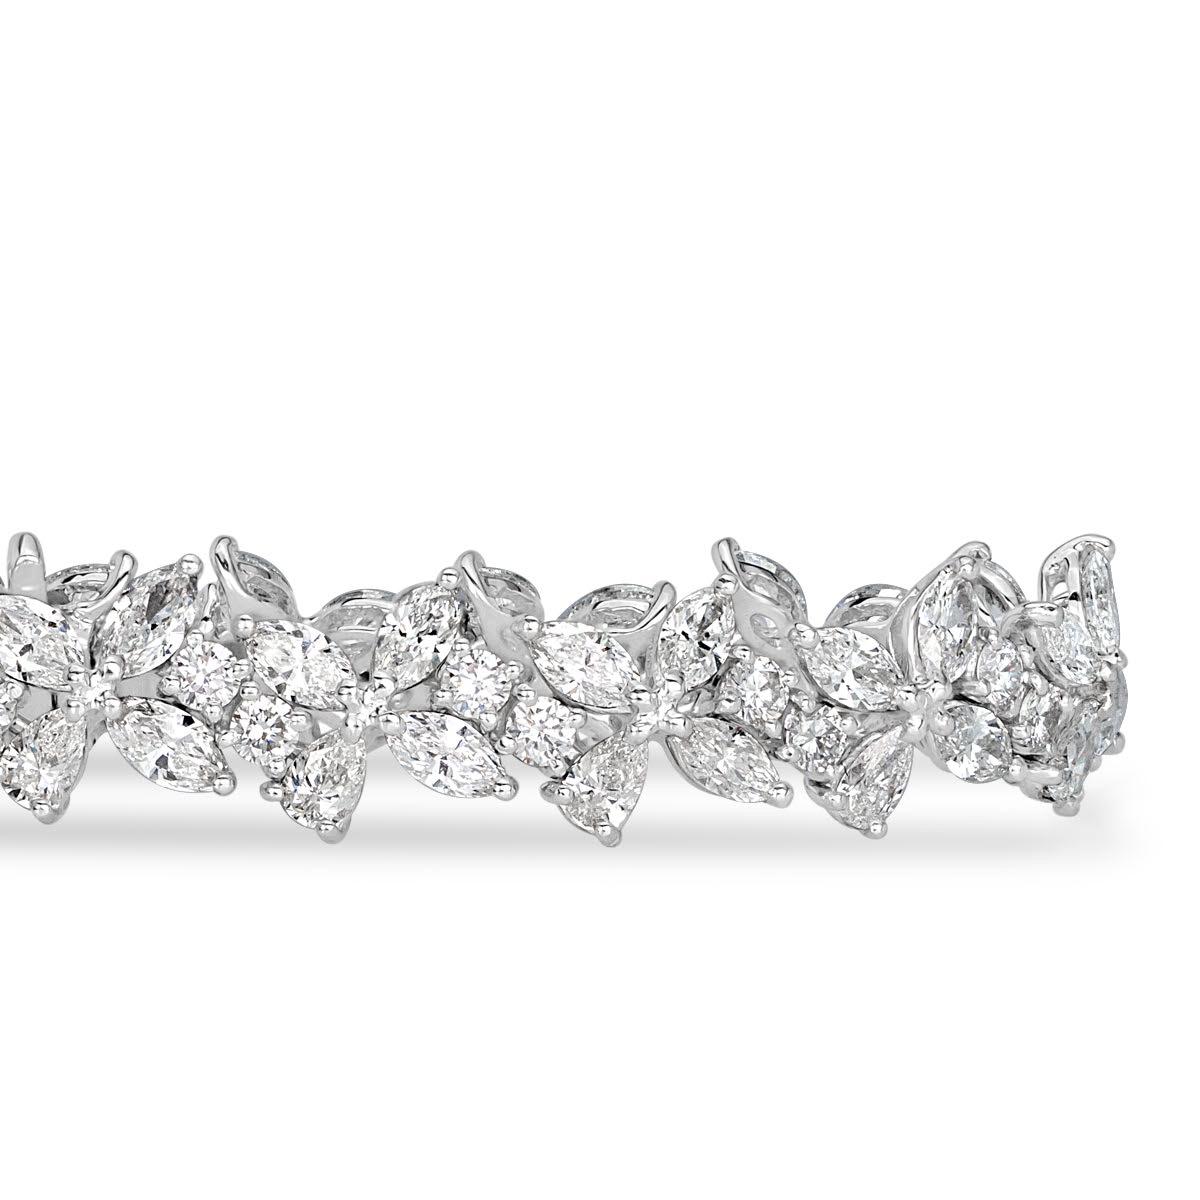 This captivating cluster diamond bracelet features a mesmerizing trio of pear shaped, marquise and round brilliant cut diamonds hand set in an exquisite floral pattern. The diamonds total 12.41ct in weight and are graded at E-F in color, VS1-VS2 in